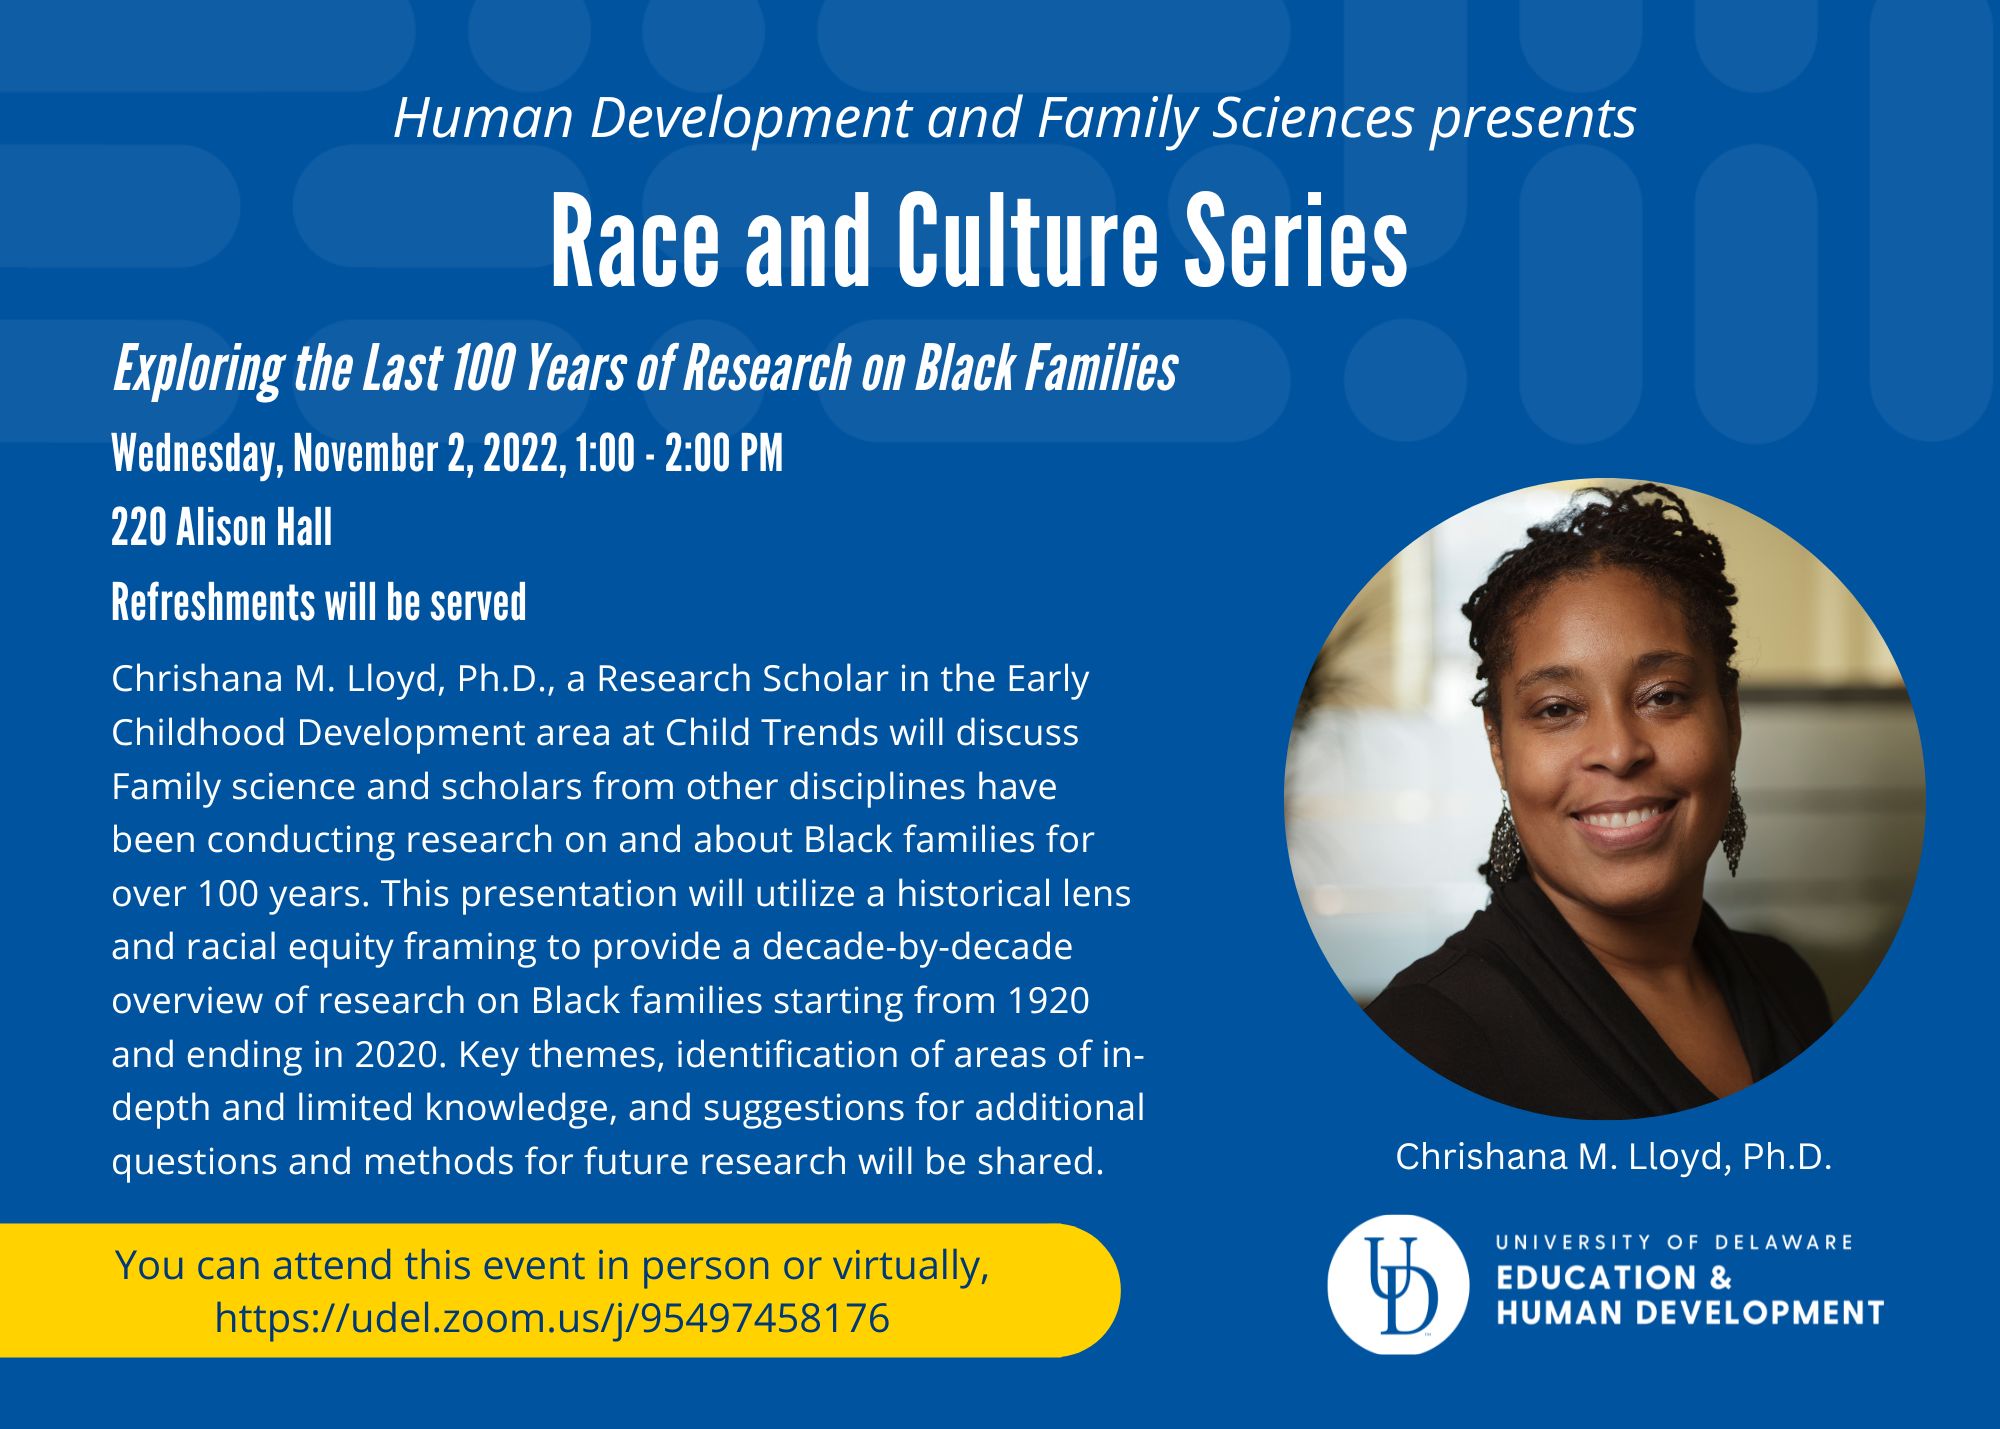 Dr. Roderick Carey presenting at the HDFS Race and Culture Series